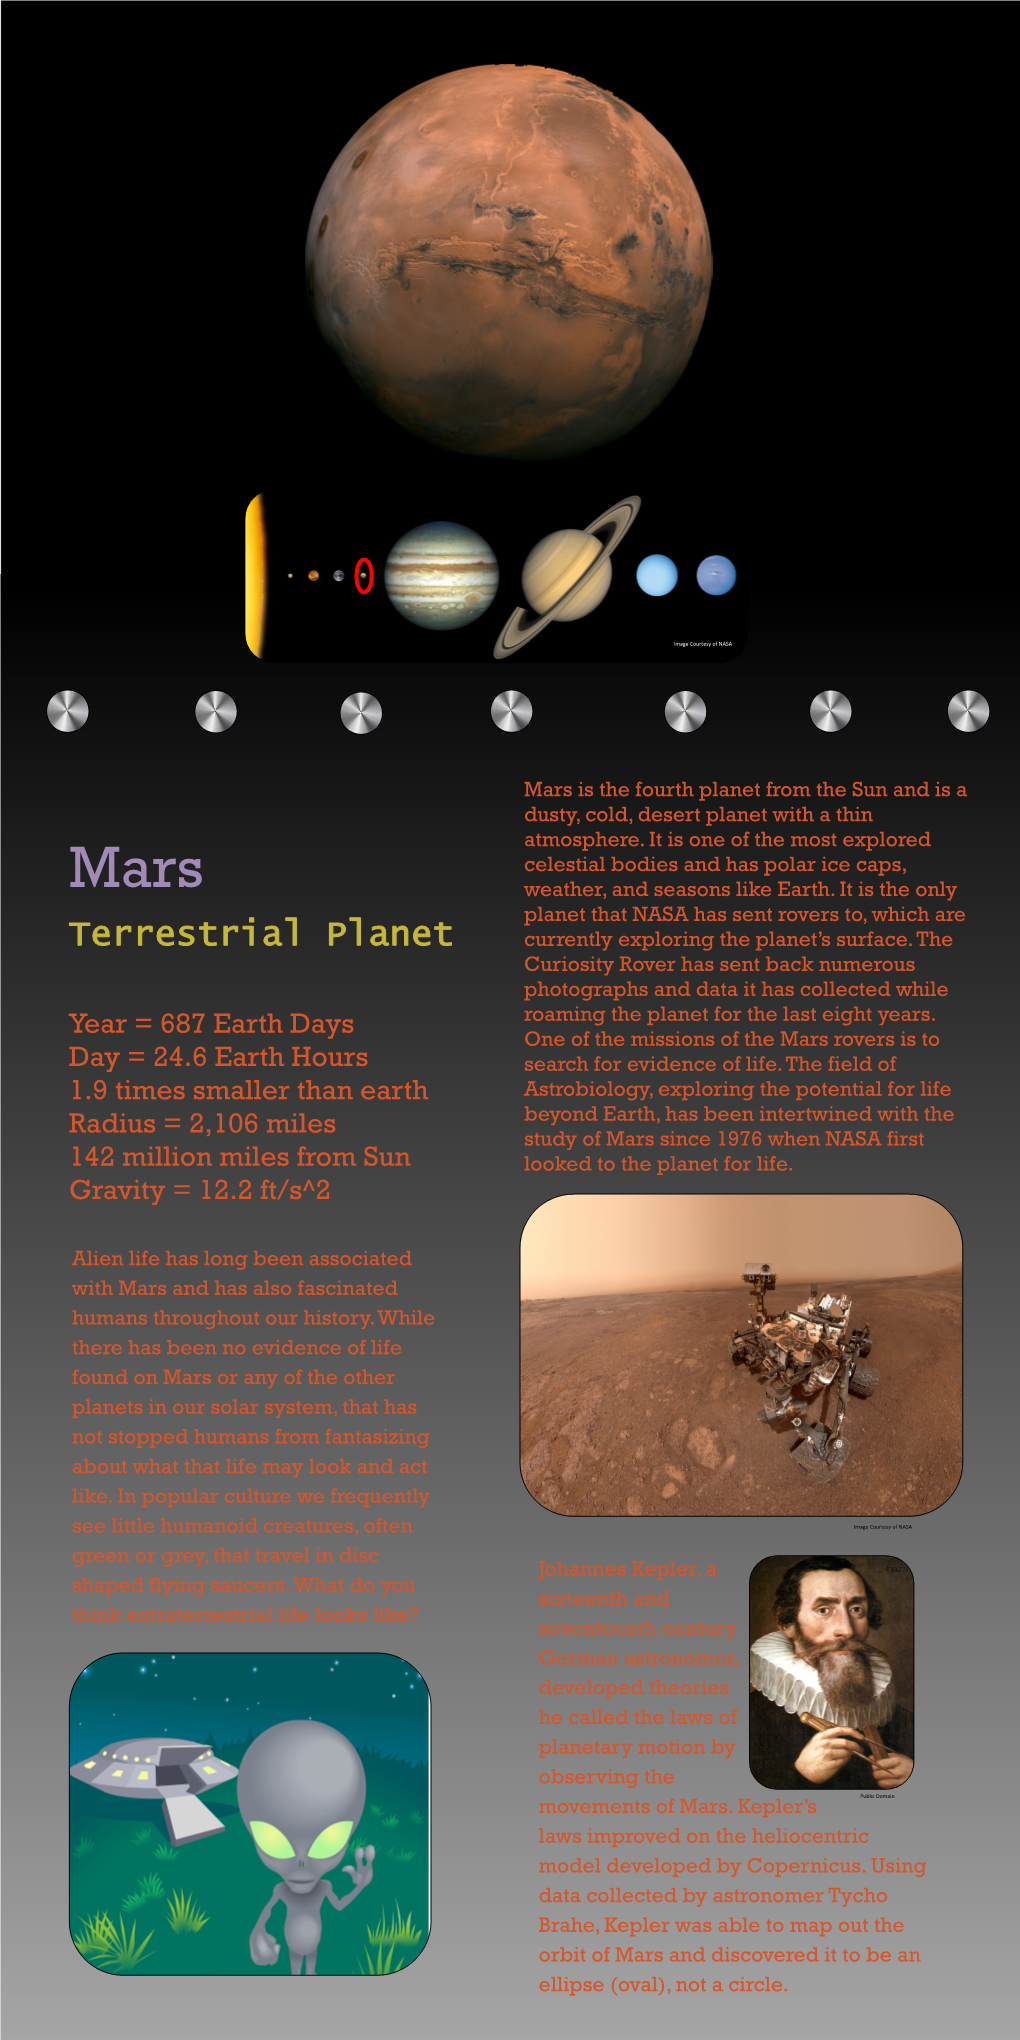 Mars Is the Fourth Planet from the Sun and Is a Dusty, Cold, Desert Planet with a Thin Atmosphere